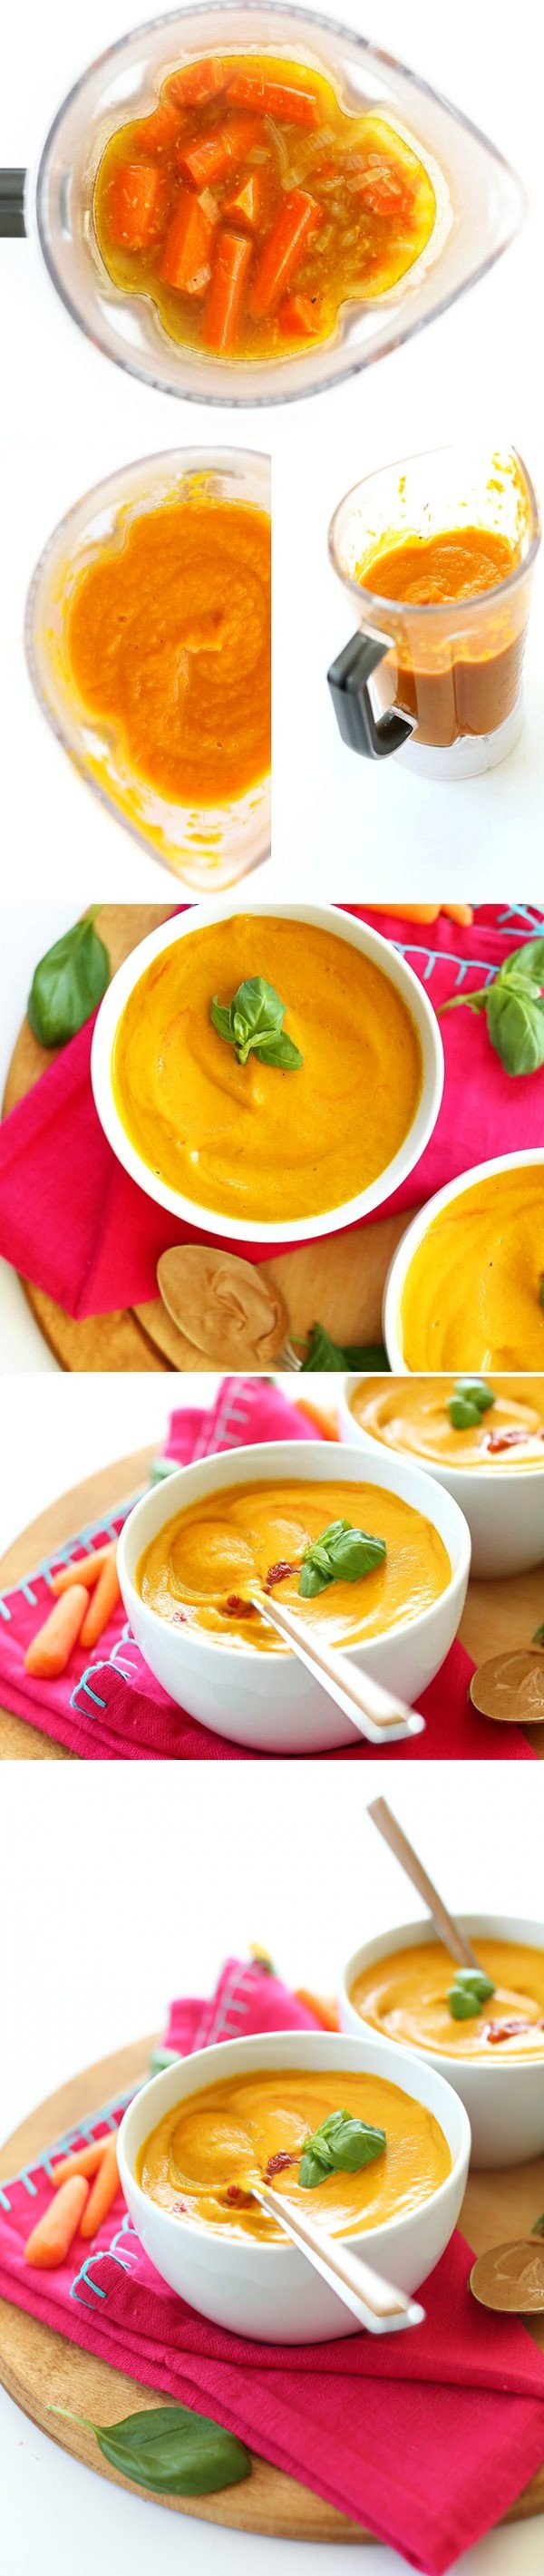 Creamy Thai Carrot Soup with Basil